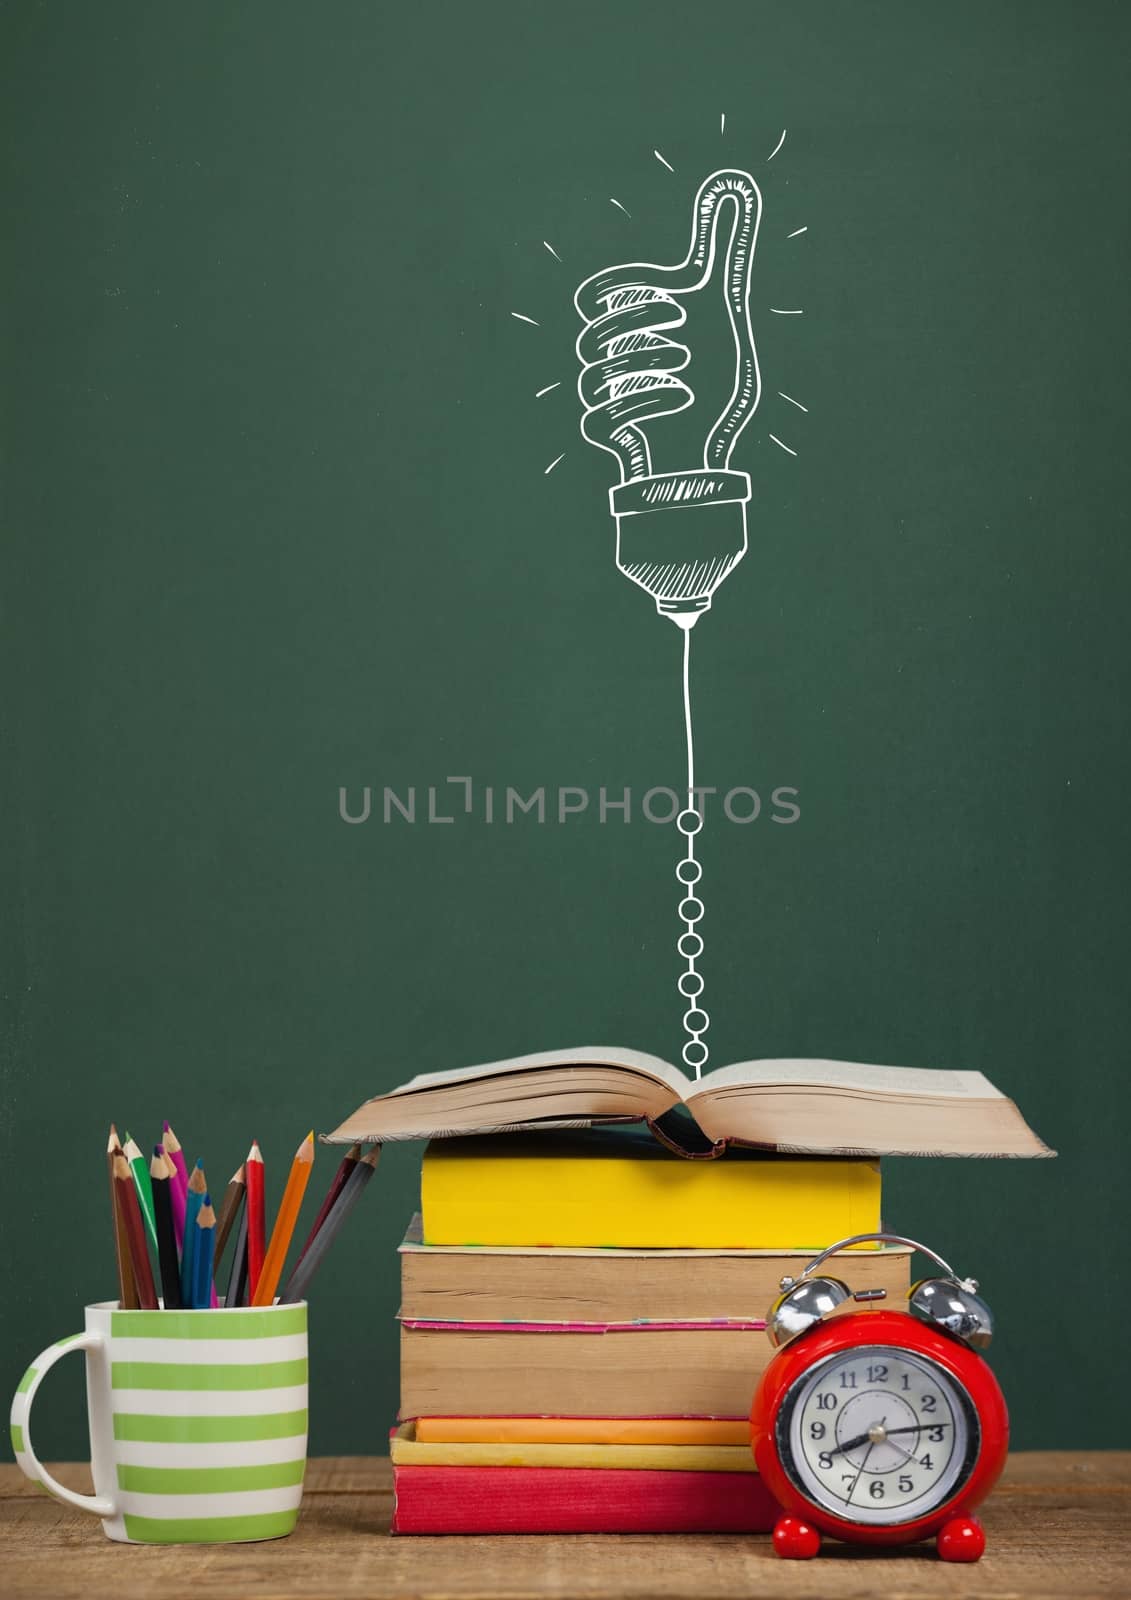 Digital composite of Books on the table against green blackboard with education and school graphics